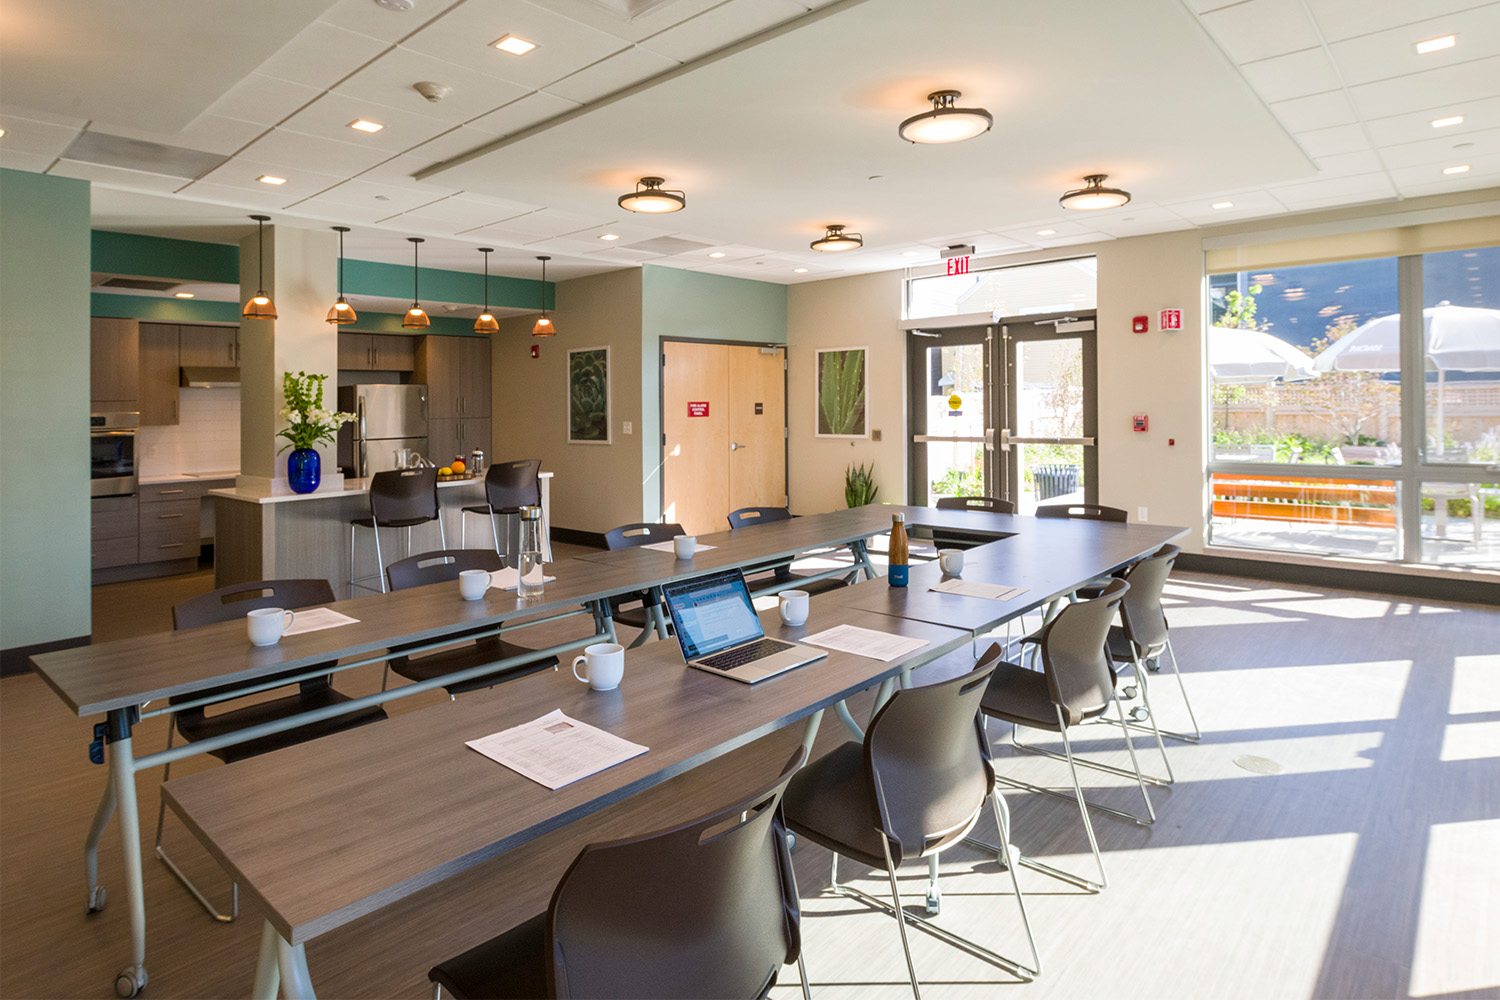 Café & Conference room with ample seating and lighting, with a partial kitchen 